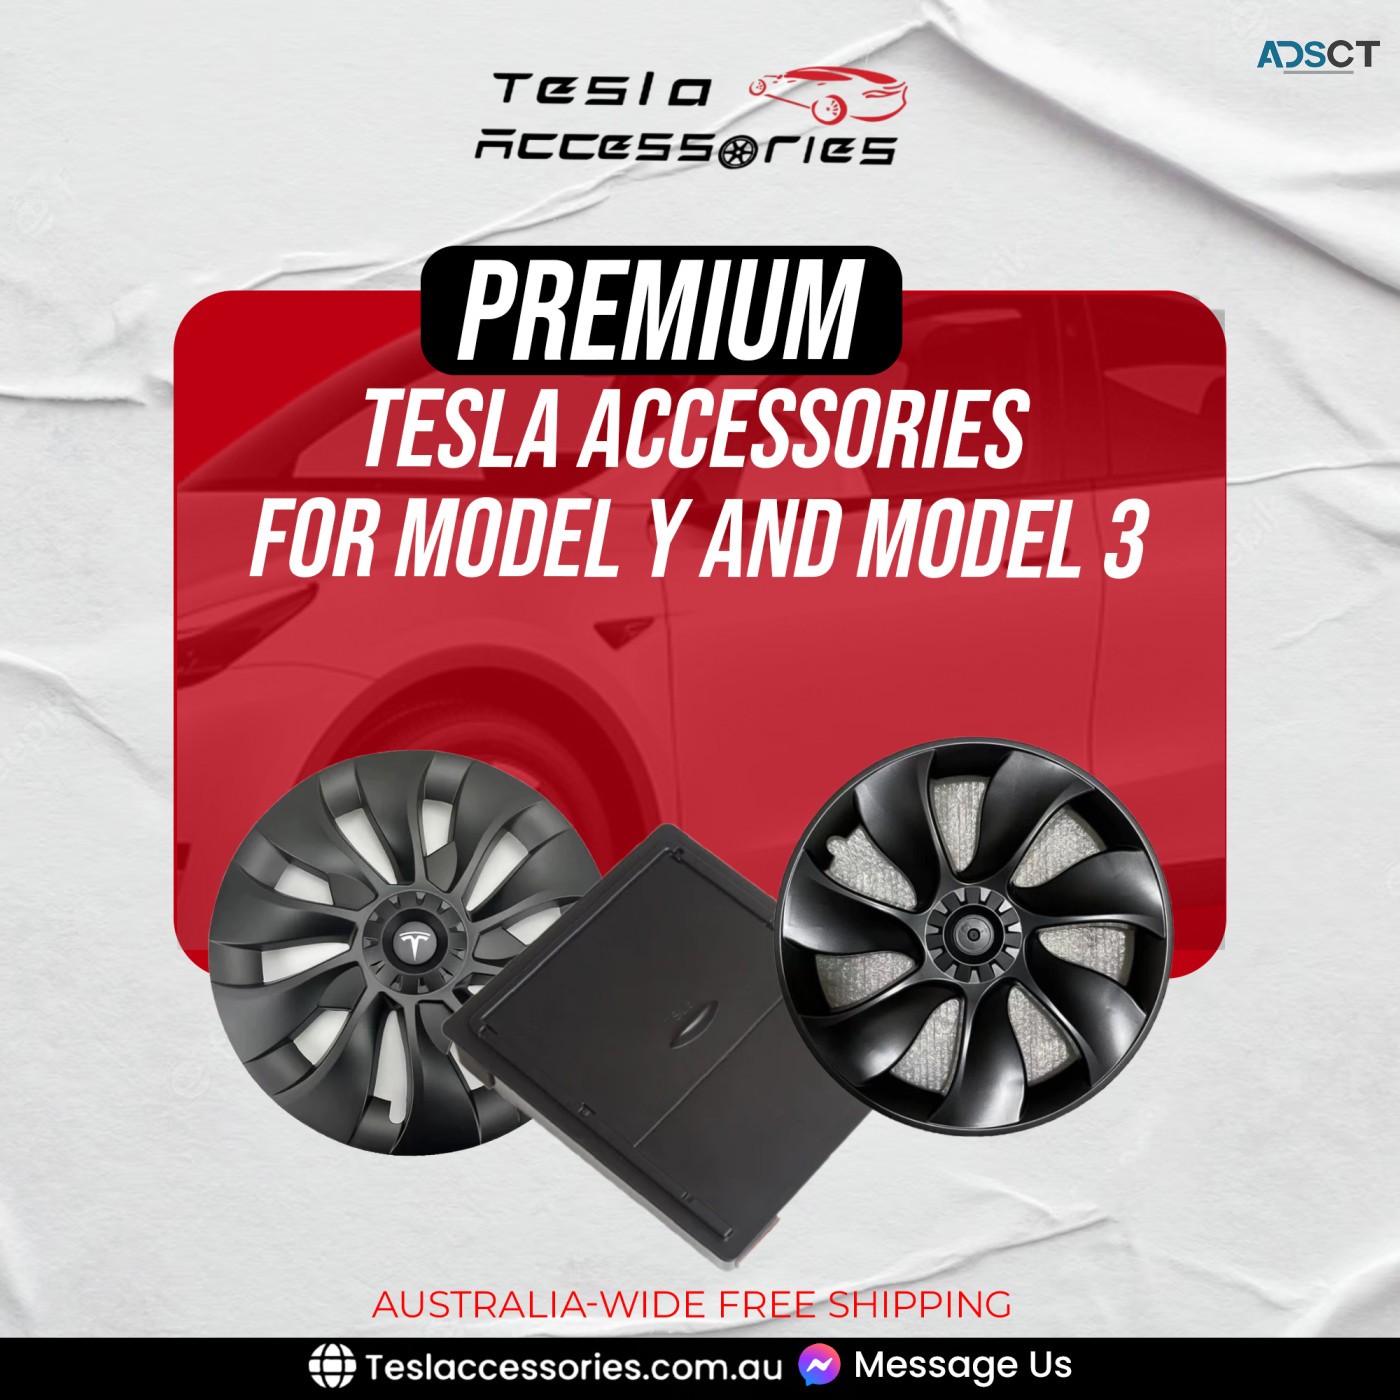 High quality Tesla accessories